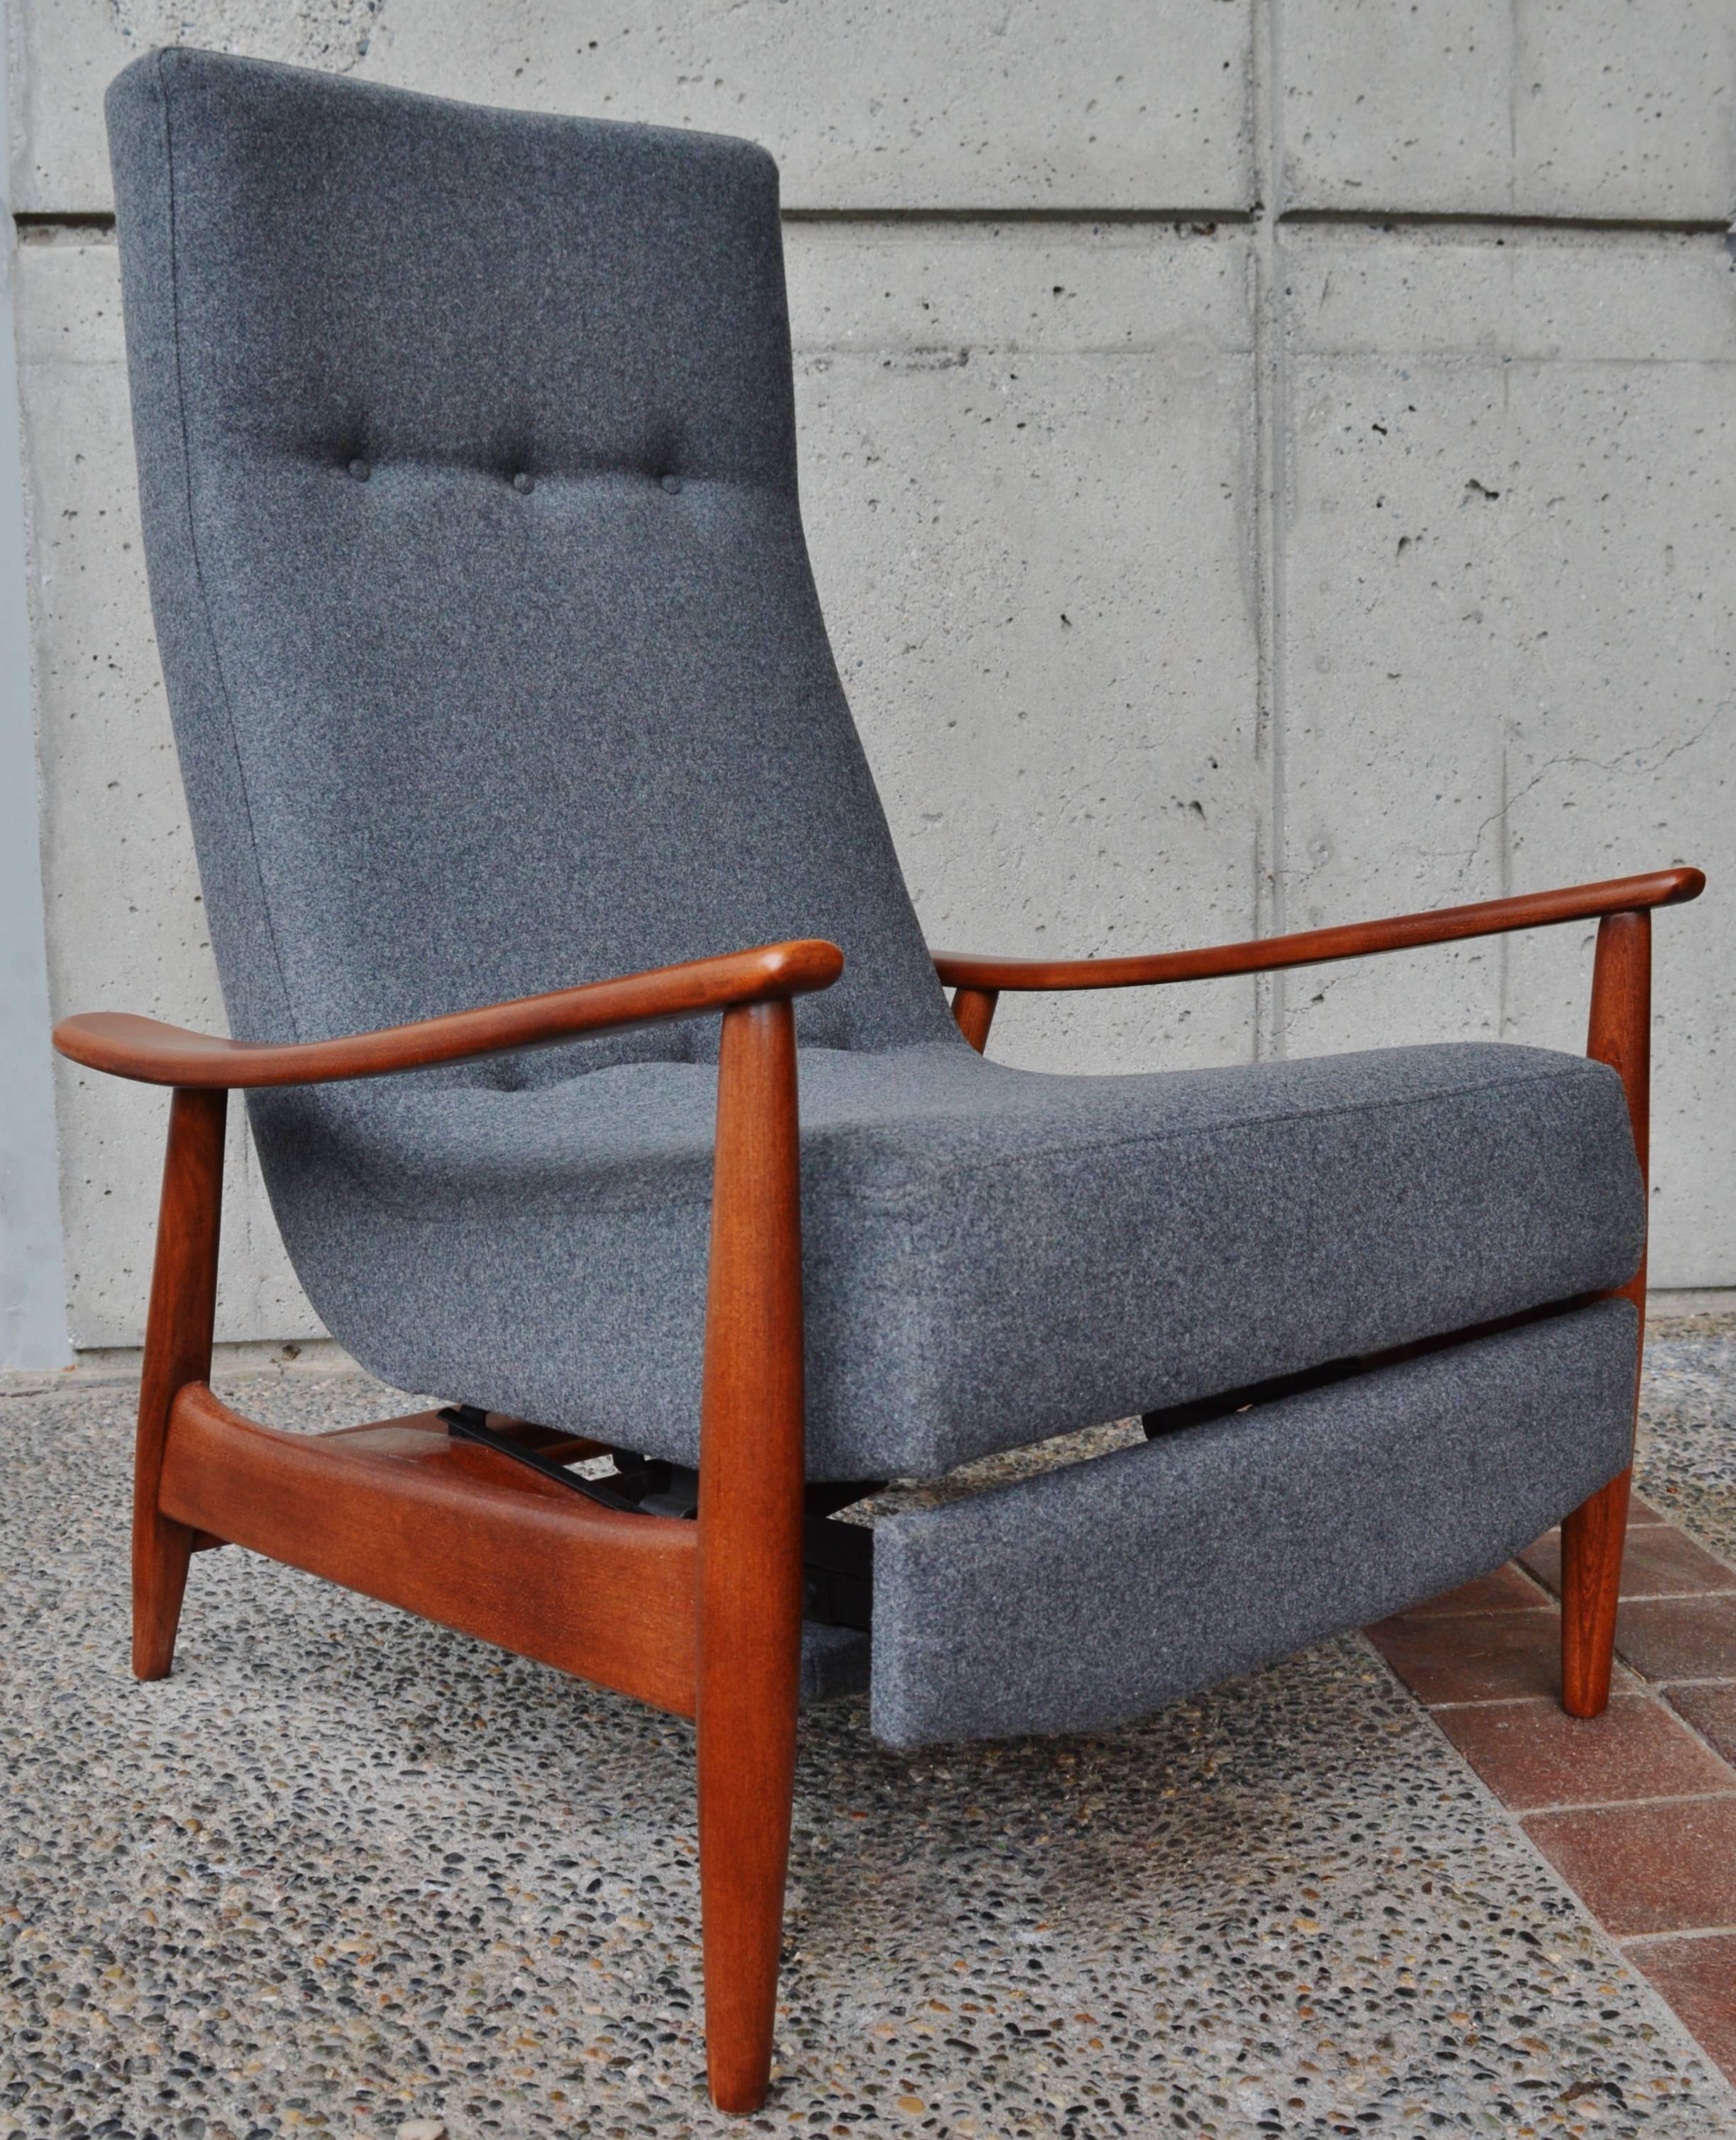 This amazing Danish modern walnut frame recliner is the kind of Lazy Boy you'd be happy to have in your home! Featuring a slim profile seat with button tufted wool, completely redone with new strapping, foam and professionally upholstery in a lovely